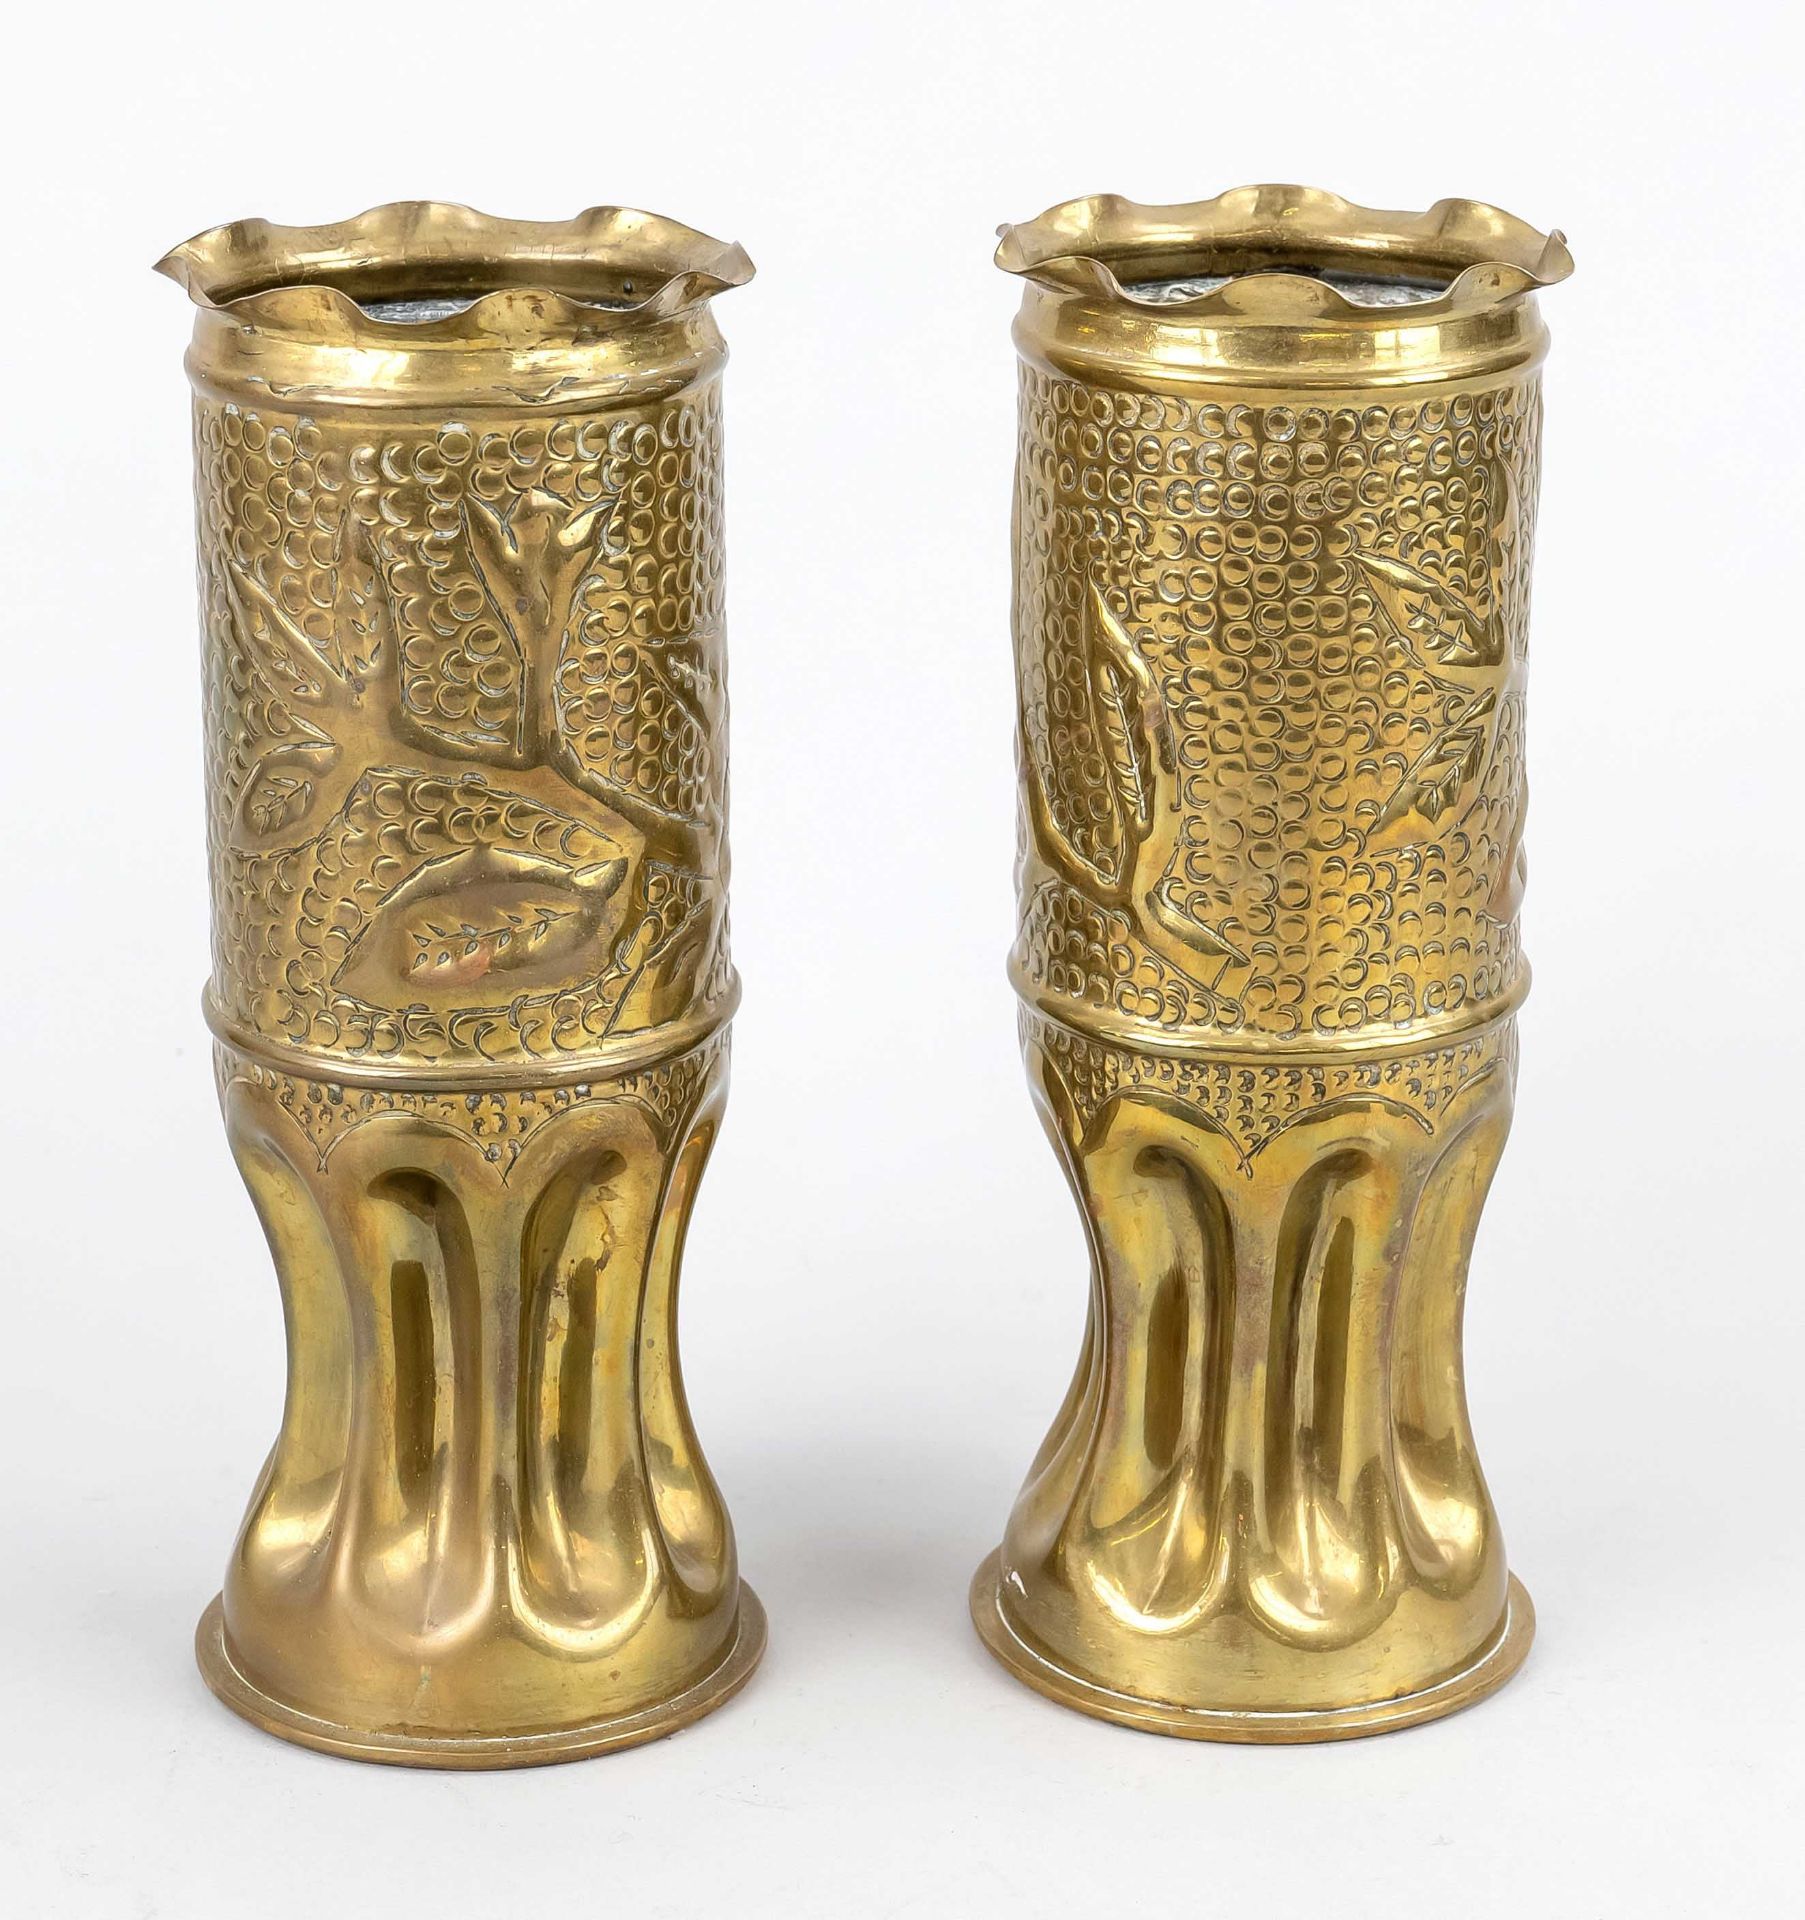 Pair of vases, early 20th century, brass. Fluted, indented foot, chased relief ornament with